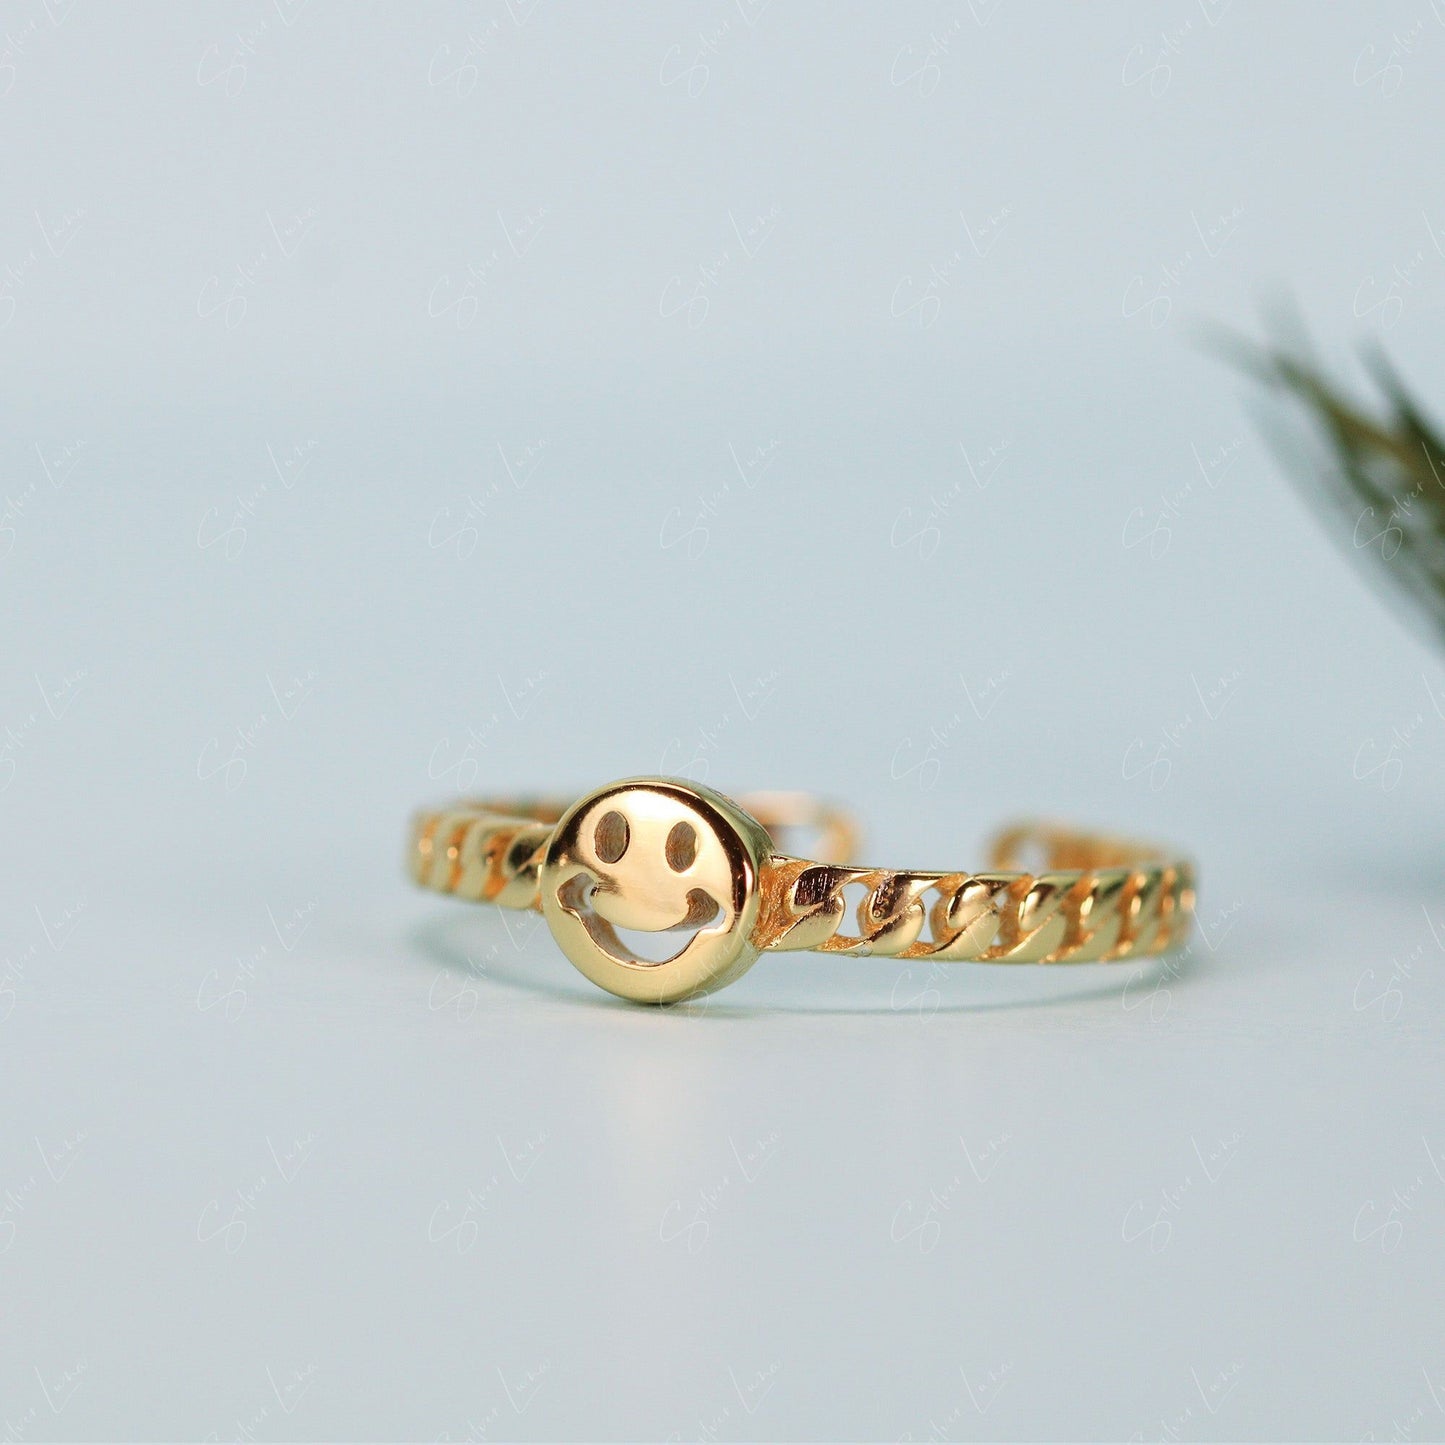 Happy face statement adjustable ring